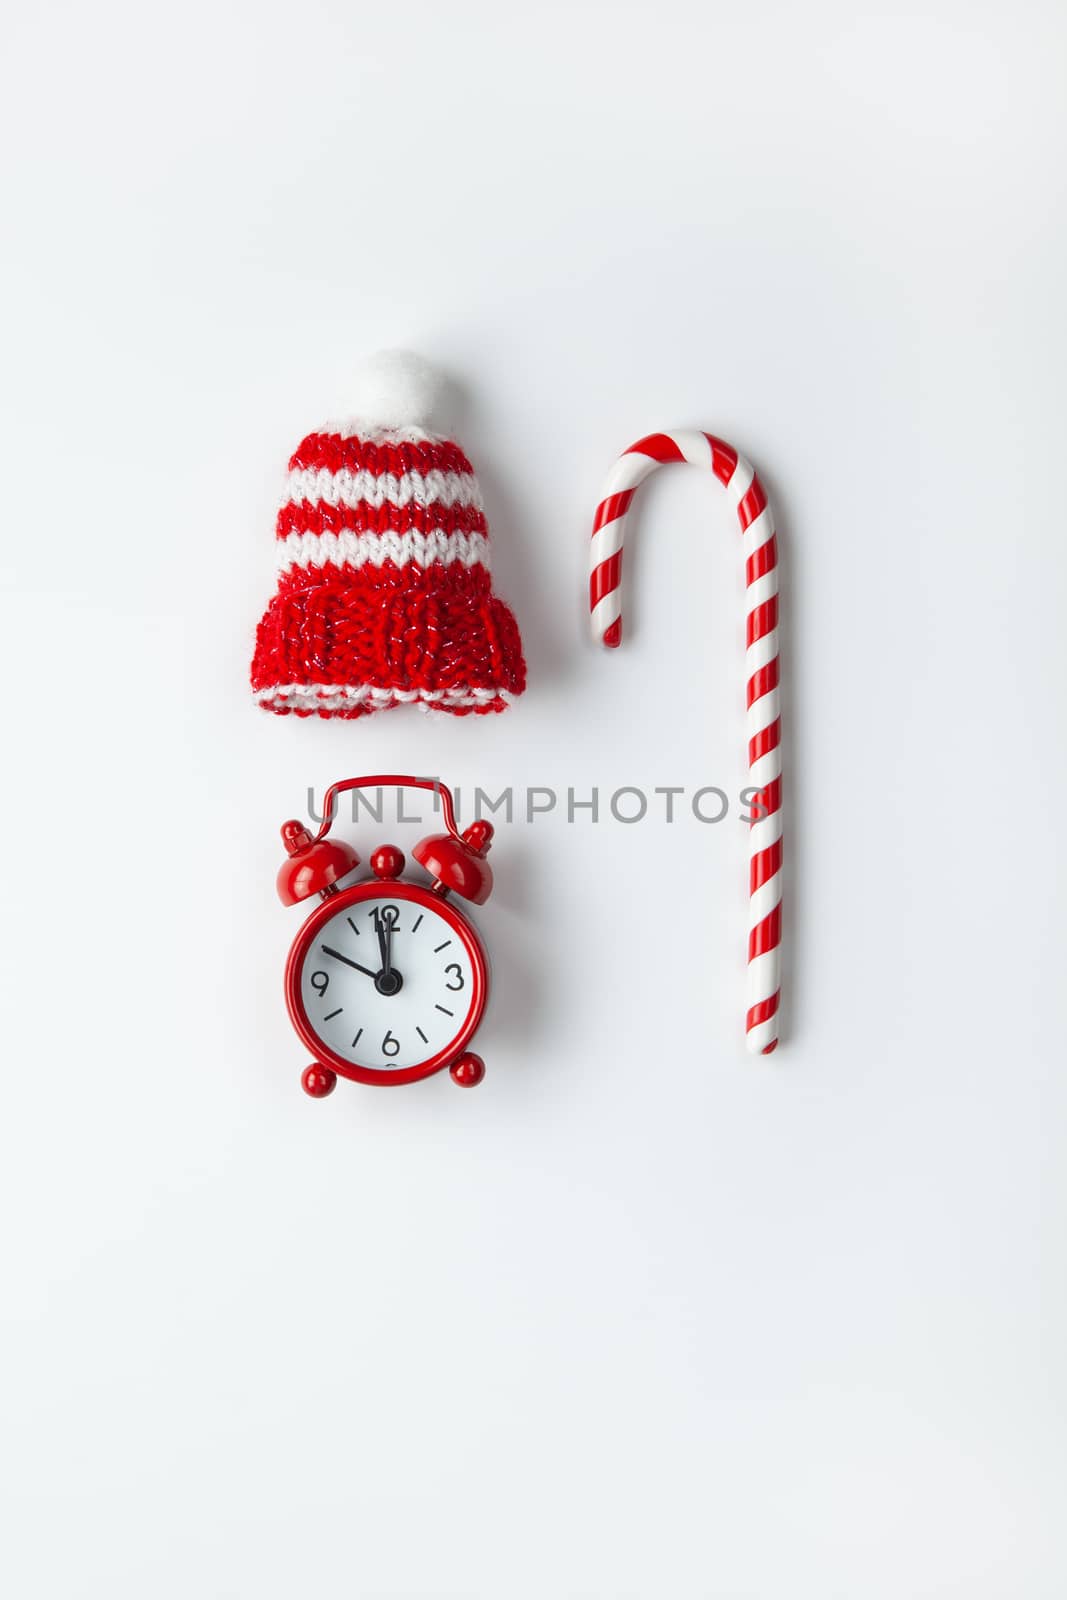 Christmas composition, cane candy, small analog clock, striped hat on white background. Minimal style. Top view. Festive, holiday concept. For social media, greeting card.